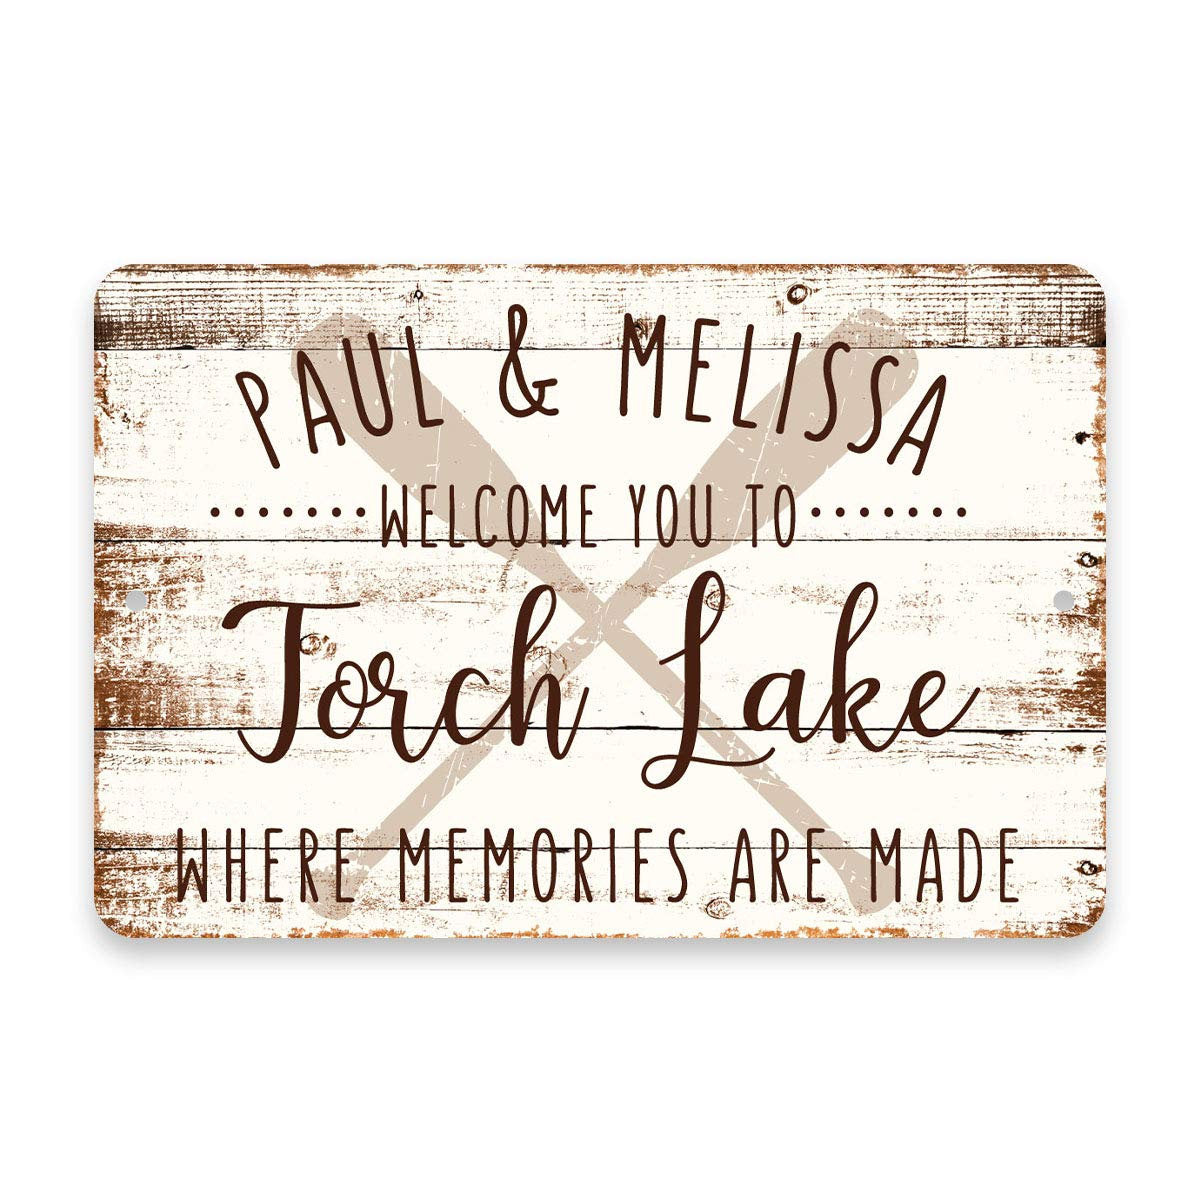 Personalized Welcome to Torch Lake Where Memories are Made Sign - 8 X 12 Metal Sign with Wood Look